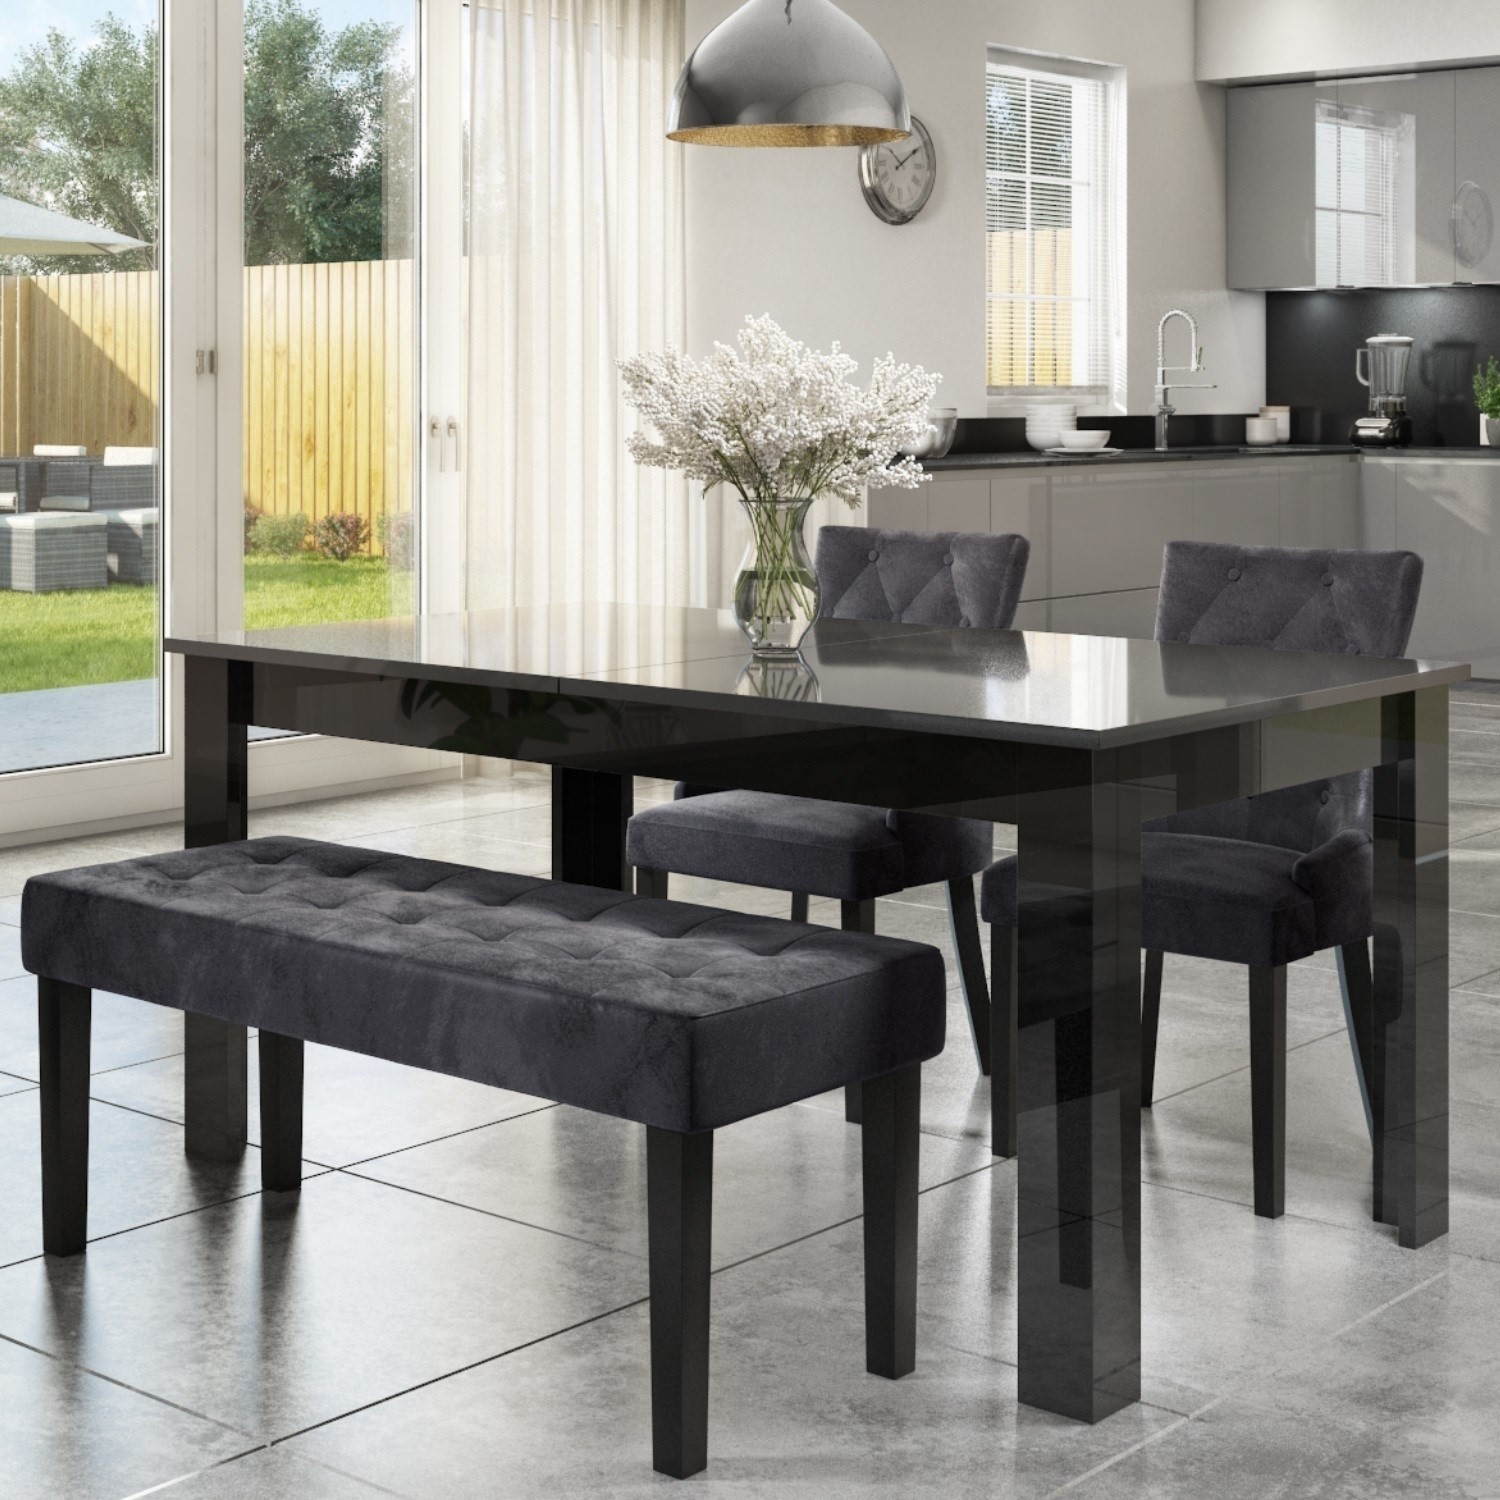 Extendable Dining Table In Black High, Bench Chairs For Dining Tables